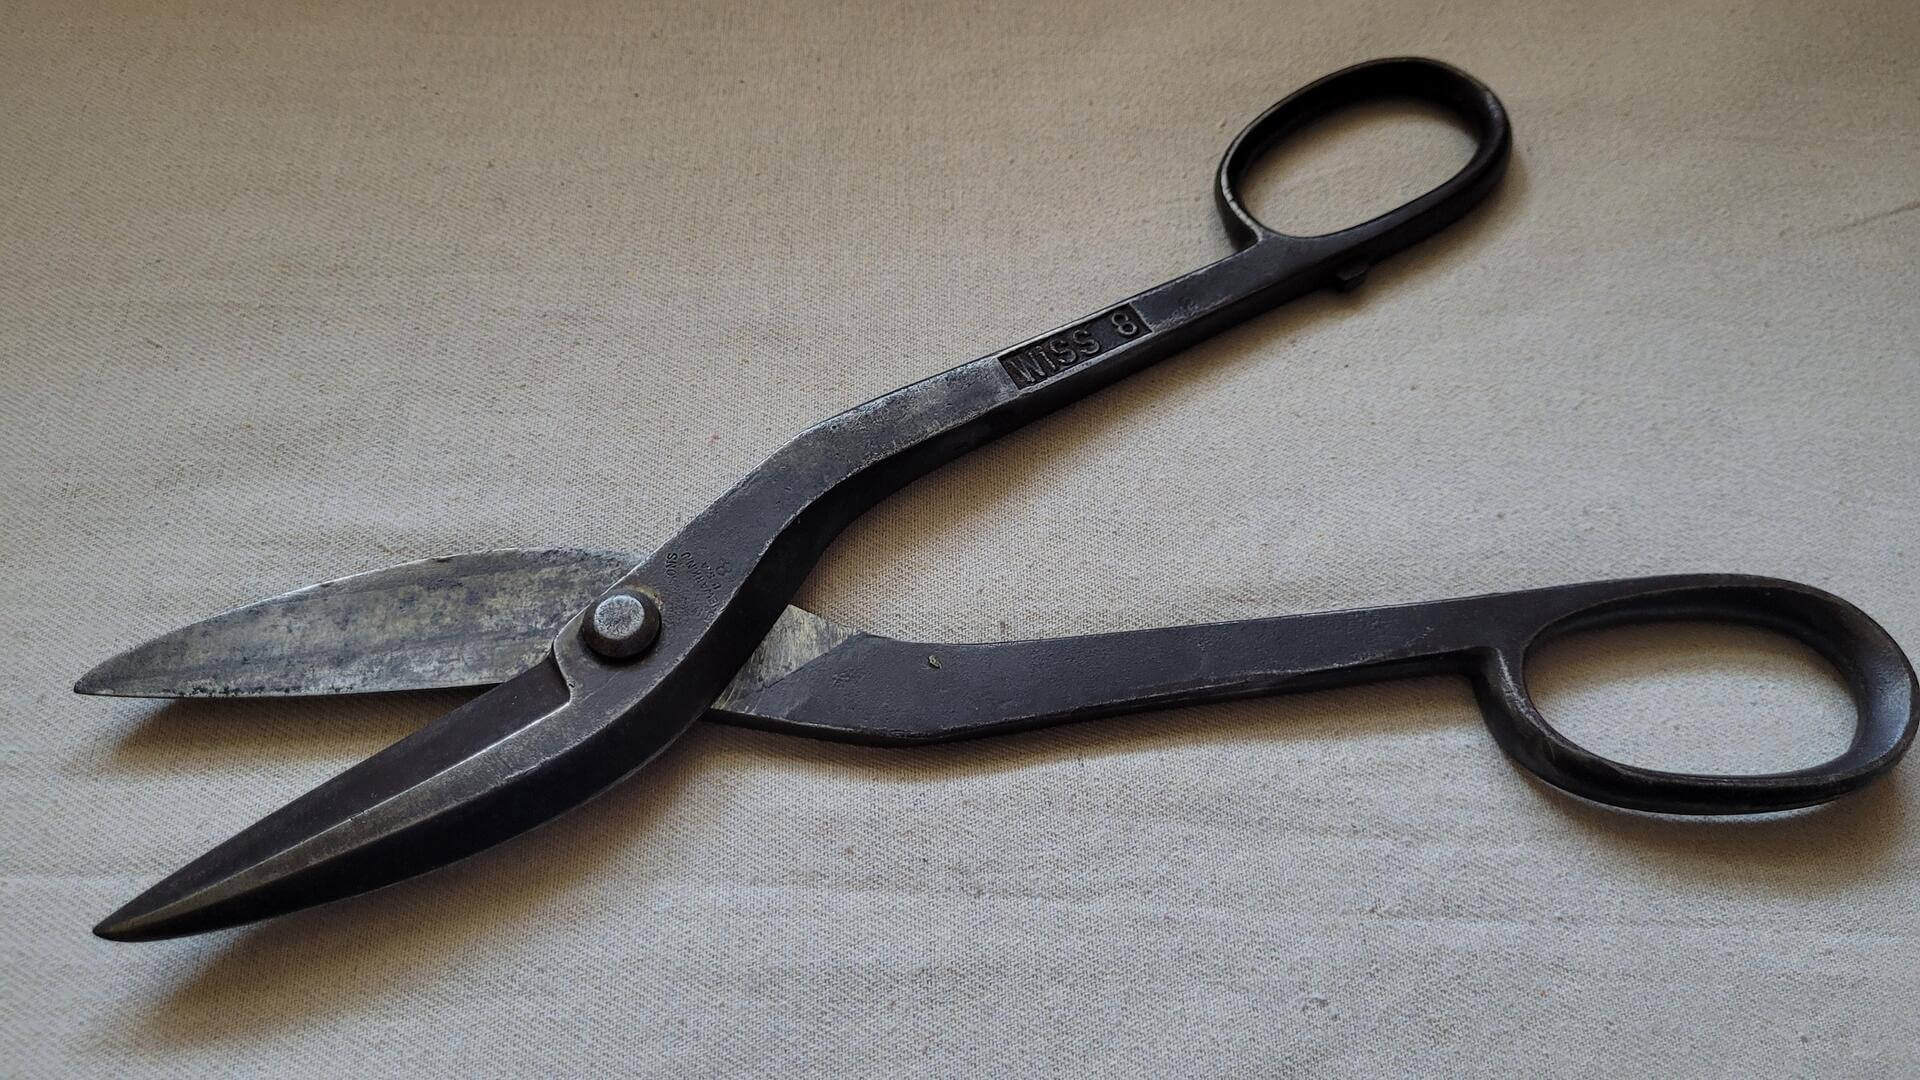 Vintage heavy duty No 8 forged steel 14 inch shears and tin snips by J. Wiss & Sons Newark NJ. Antique made in USA collectible sheet metal quality cutting tools